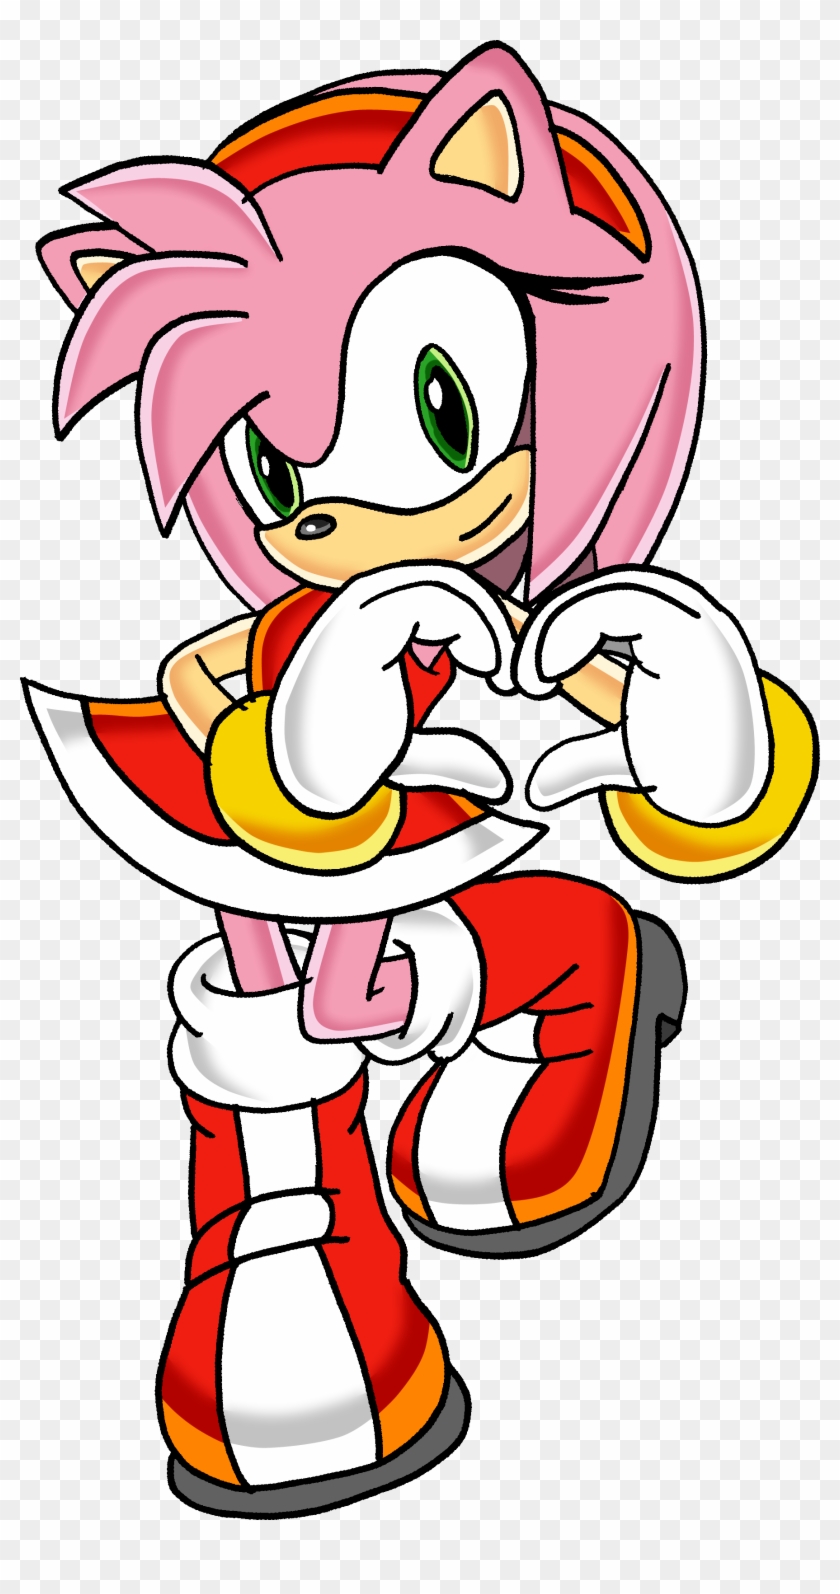 Amy Rose Tails19950 - Sonic The Hedgehog 4 #405858